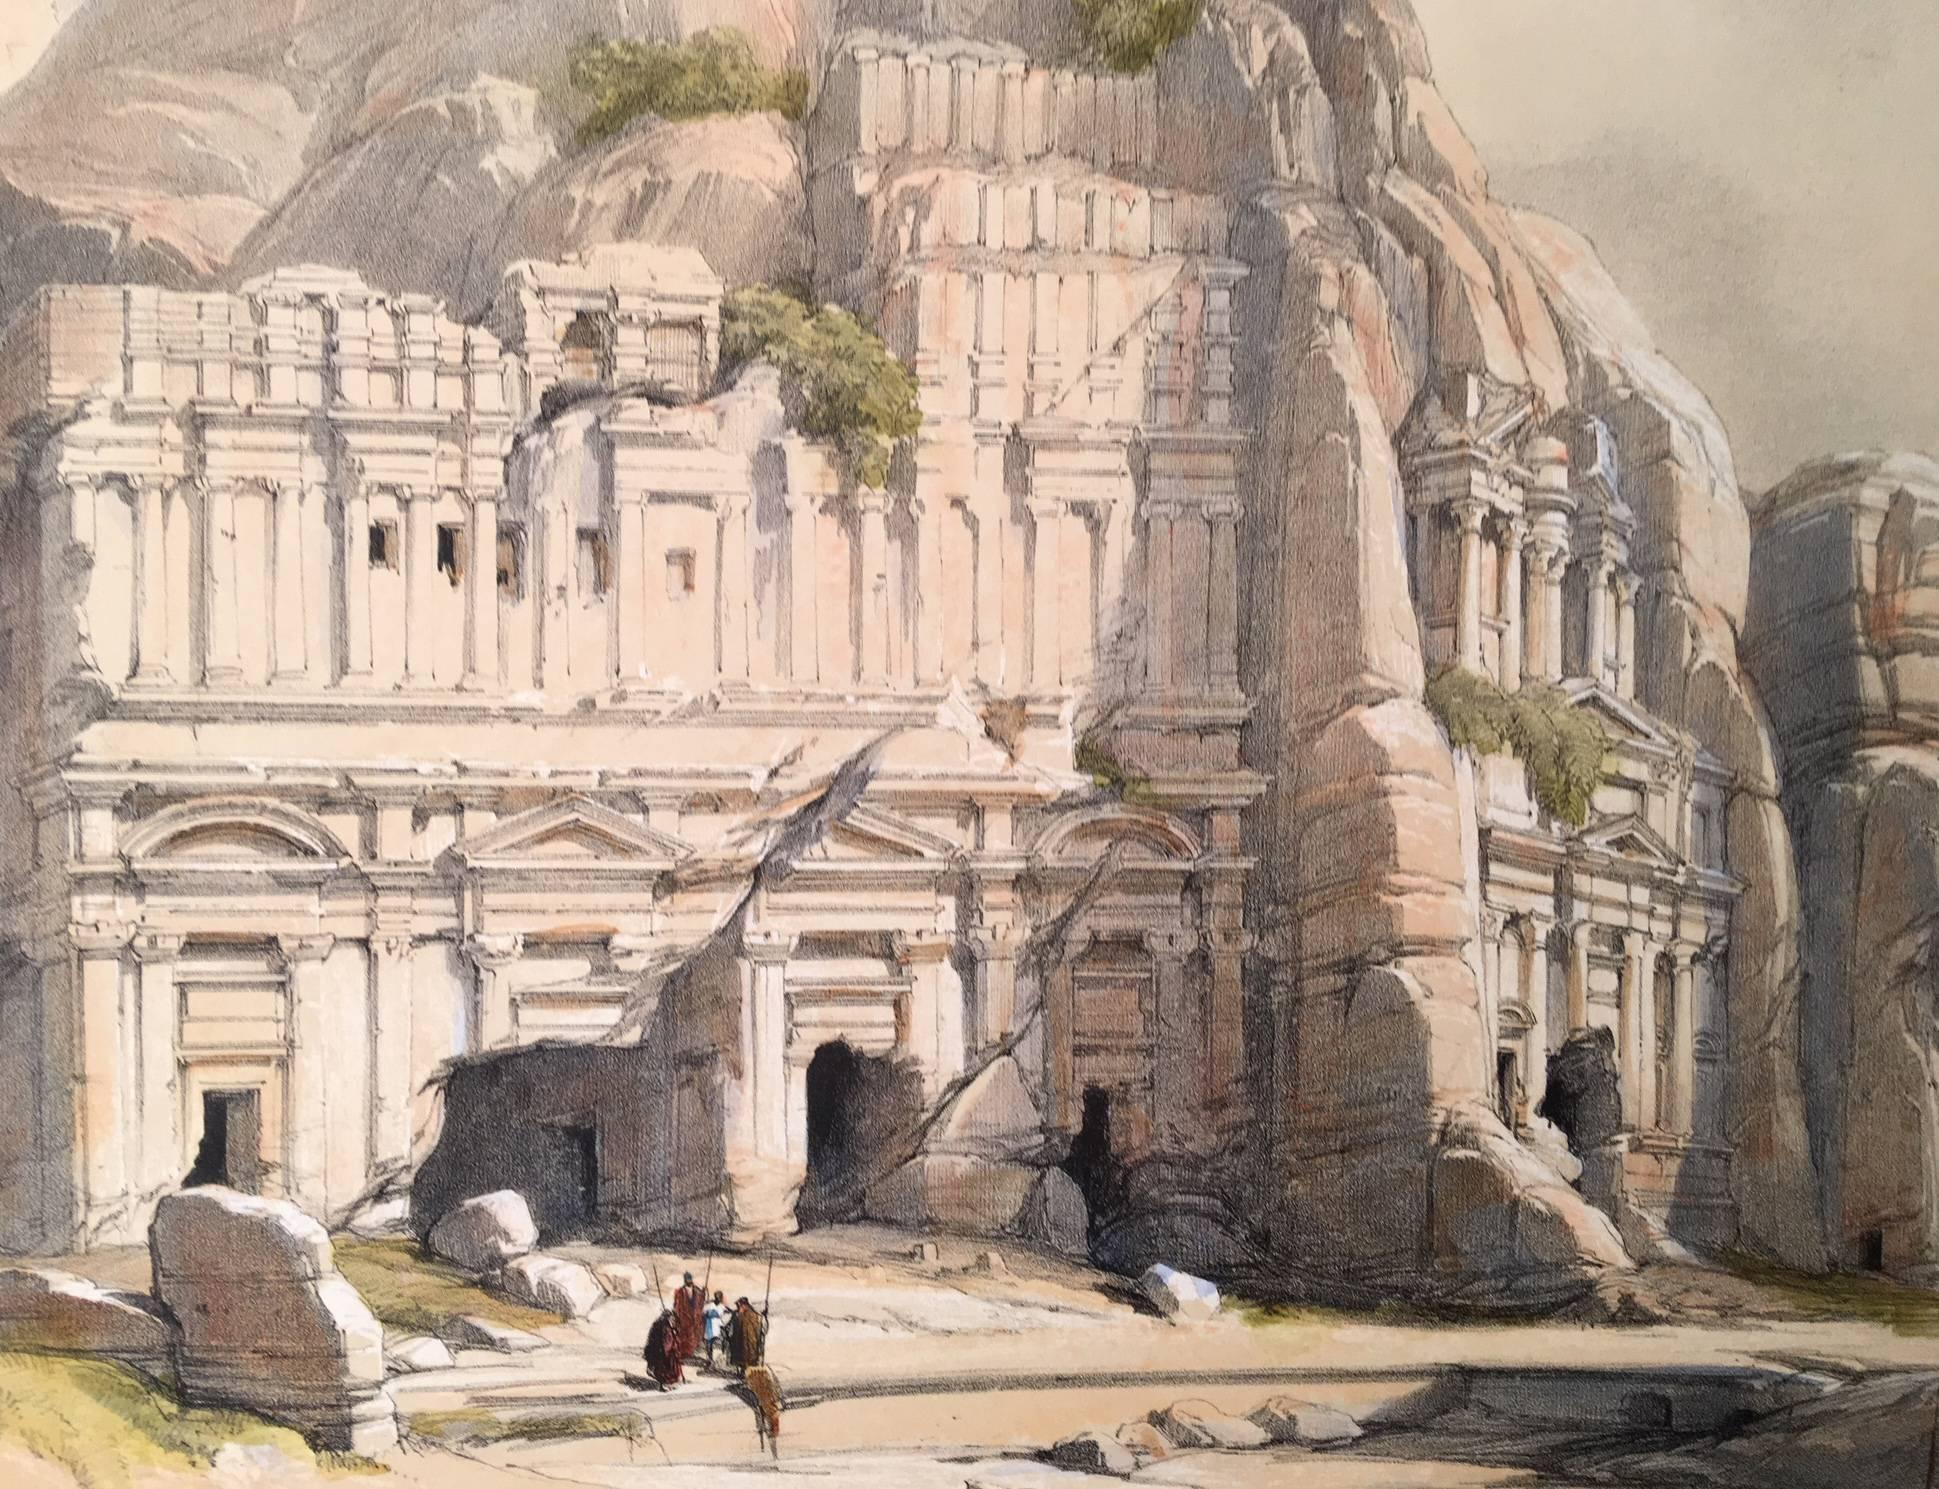 Original hand-colored lithograph by David Roberts (1796 – 1864) published by F.G. Moon, 1842. 
Petra is a historical and archaeological city in southern Jordan, established in 312 BC. It is famous for its rock-cut architecture and water conduit